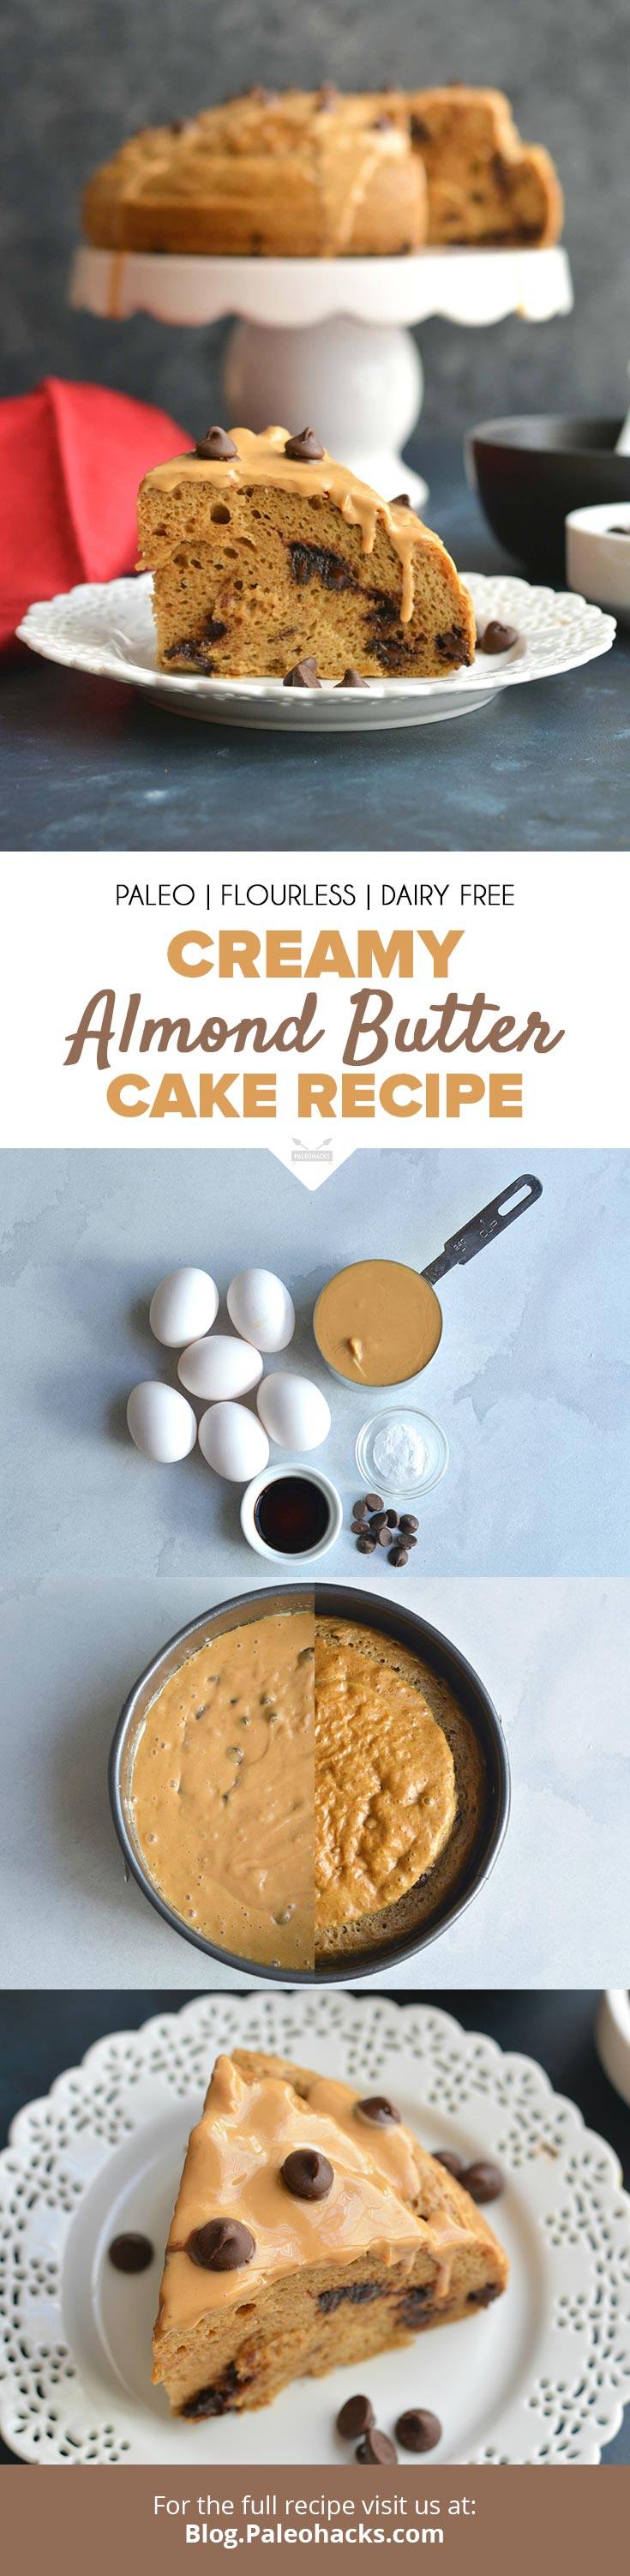 Made with just six ingredients, this Almond Butter Cake is light, fluffy, and filled with chocolate chips nestled into each bite.